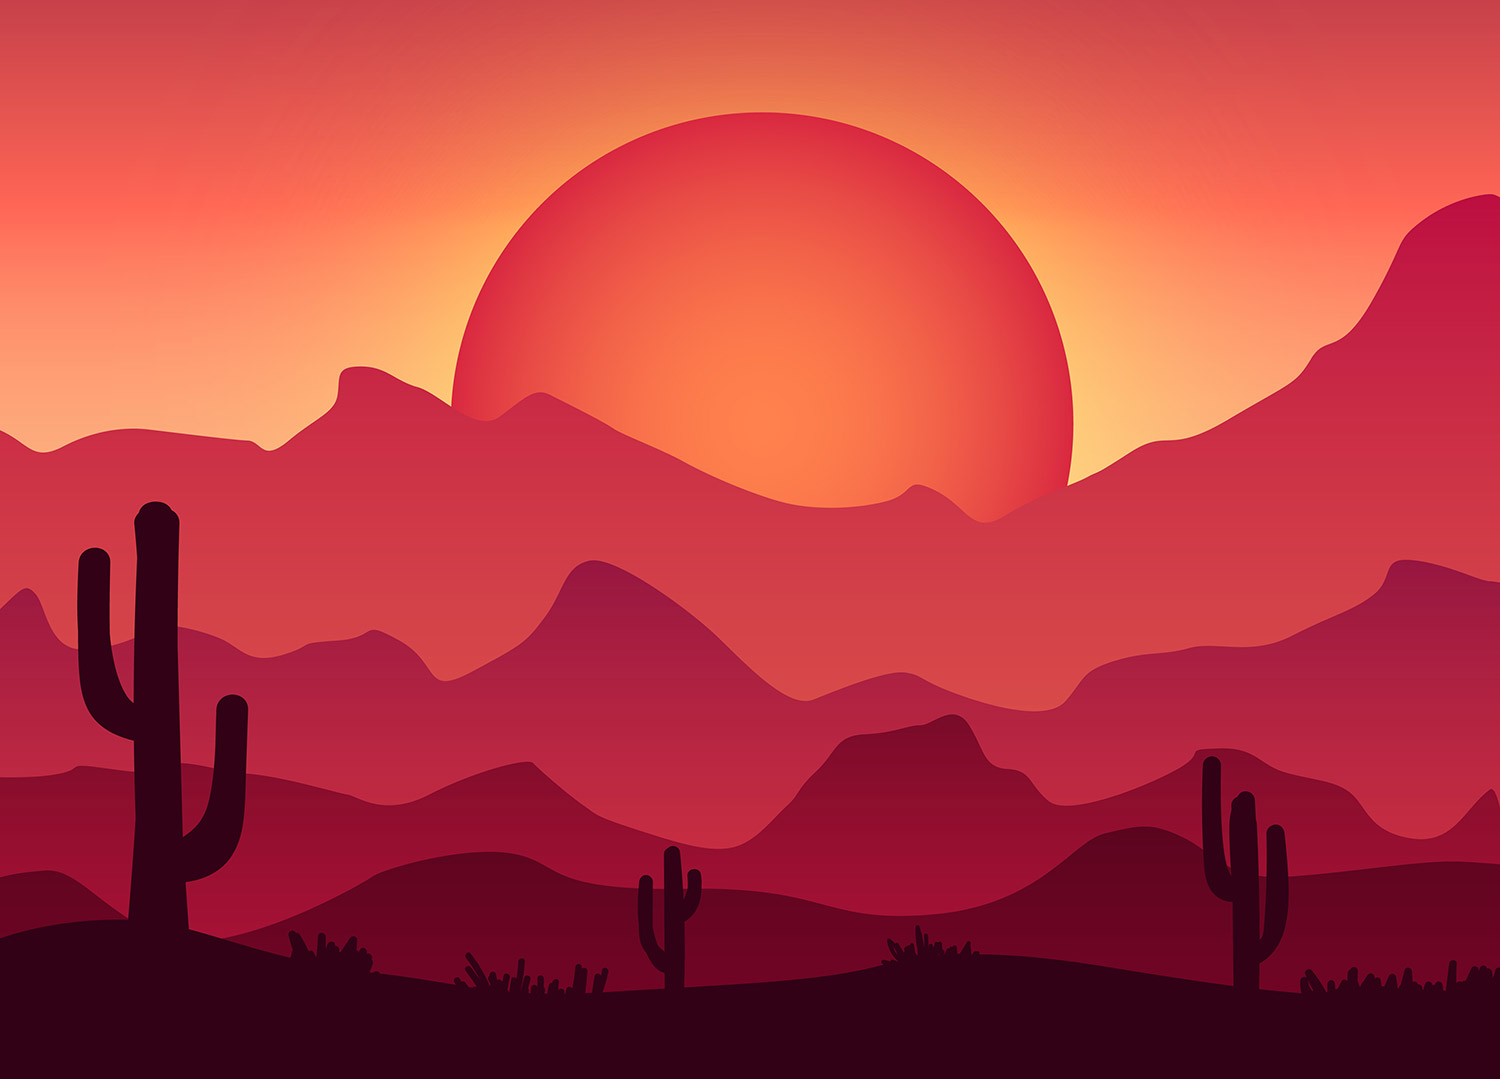 How To Create a Colorful Vector Landscape Illustration | Blog